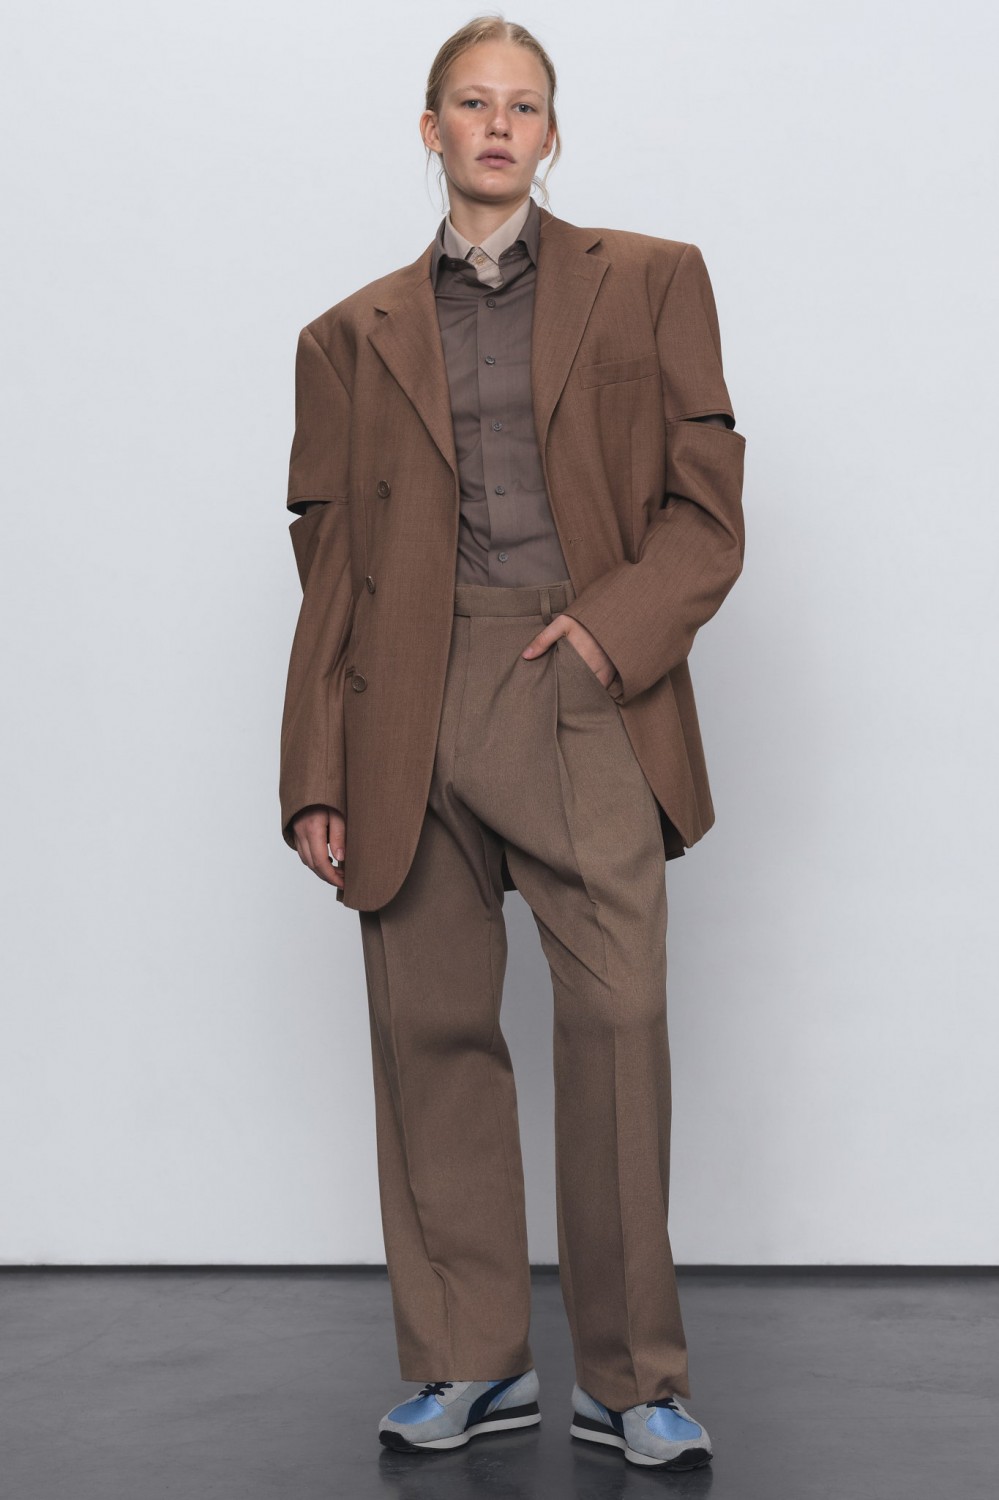 In a PostPhoebe Philo Celine World Bettter Is the Answer to Chic Suiting